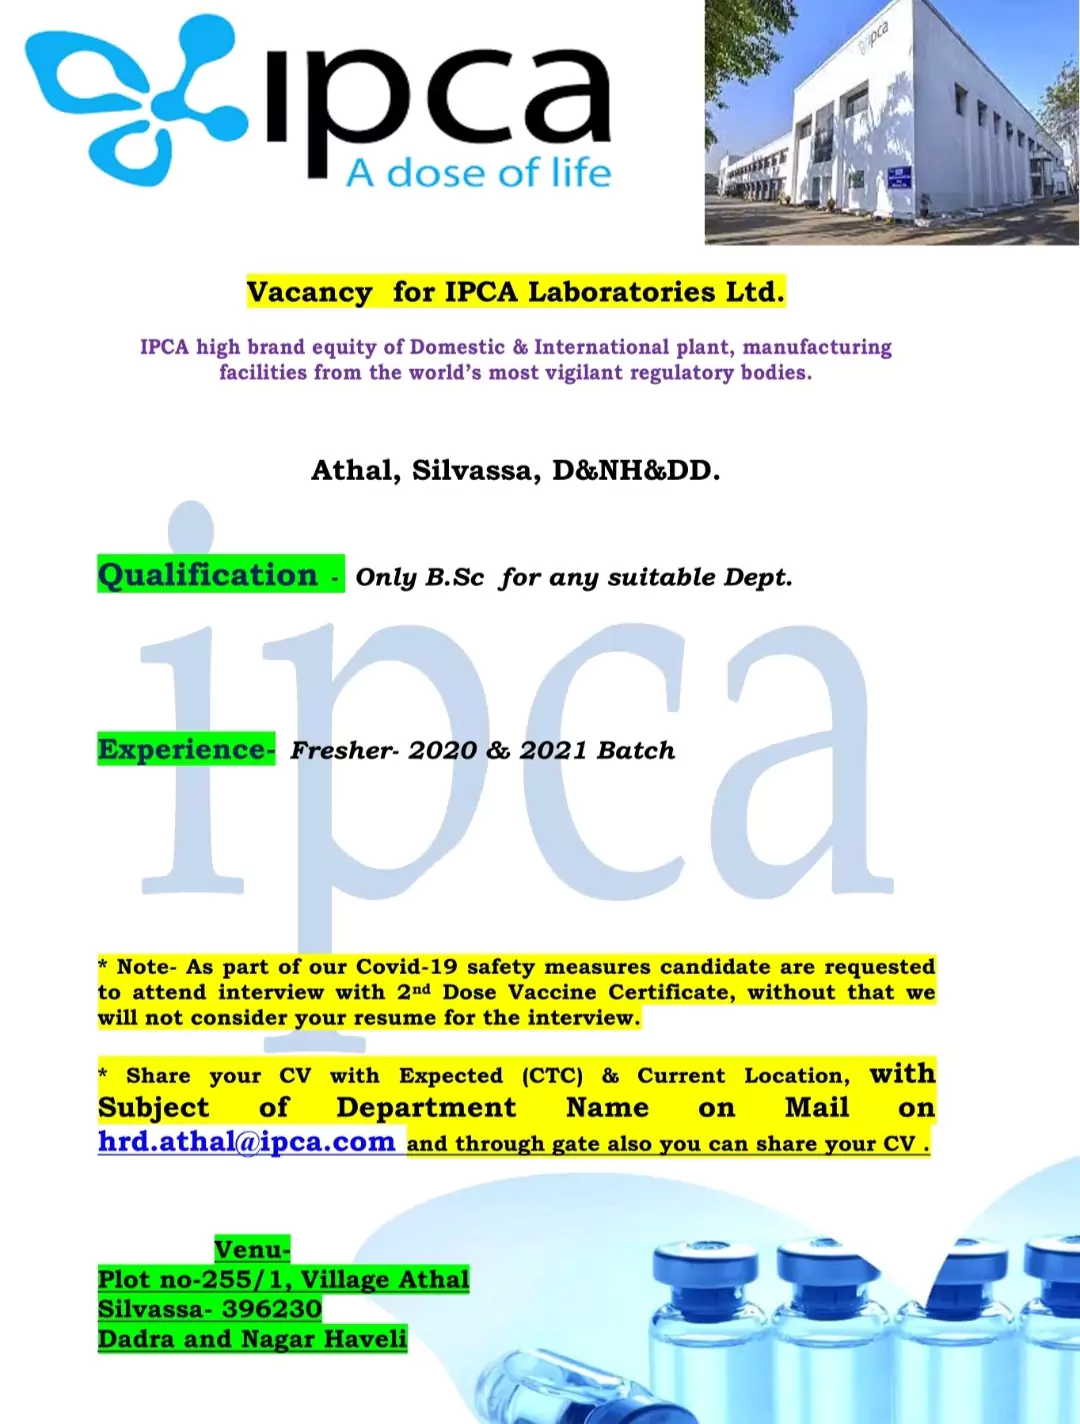 ipca laboratories fresher openings for bsc students any suitable department